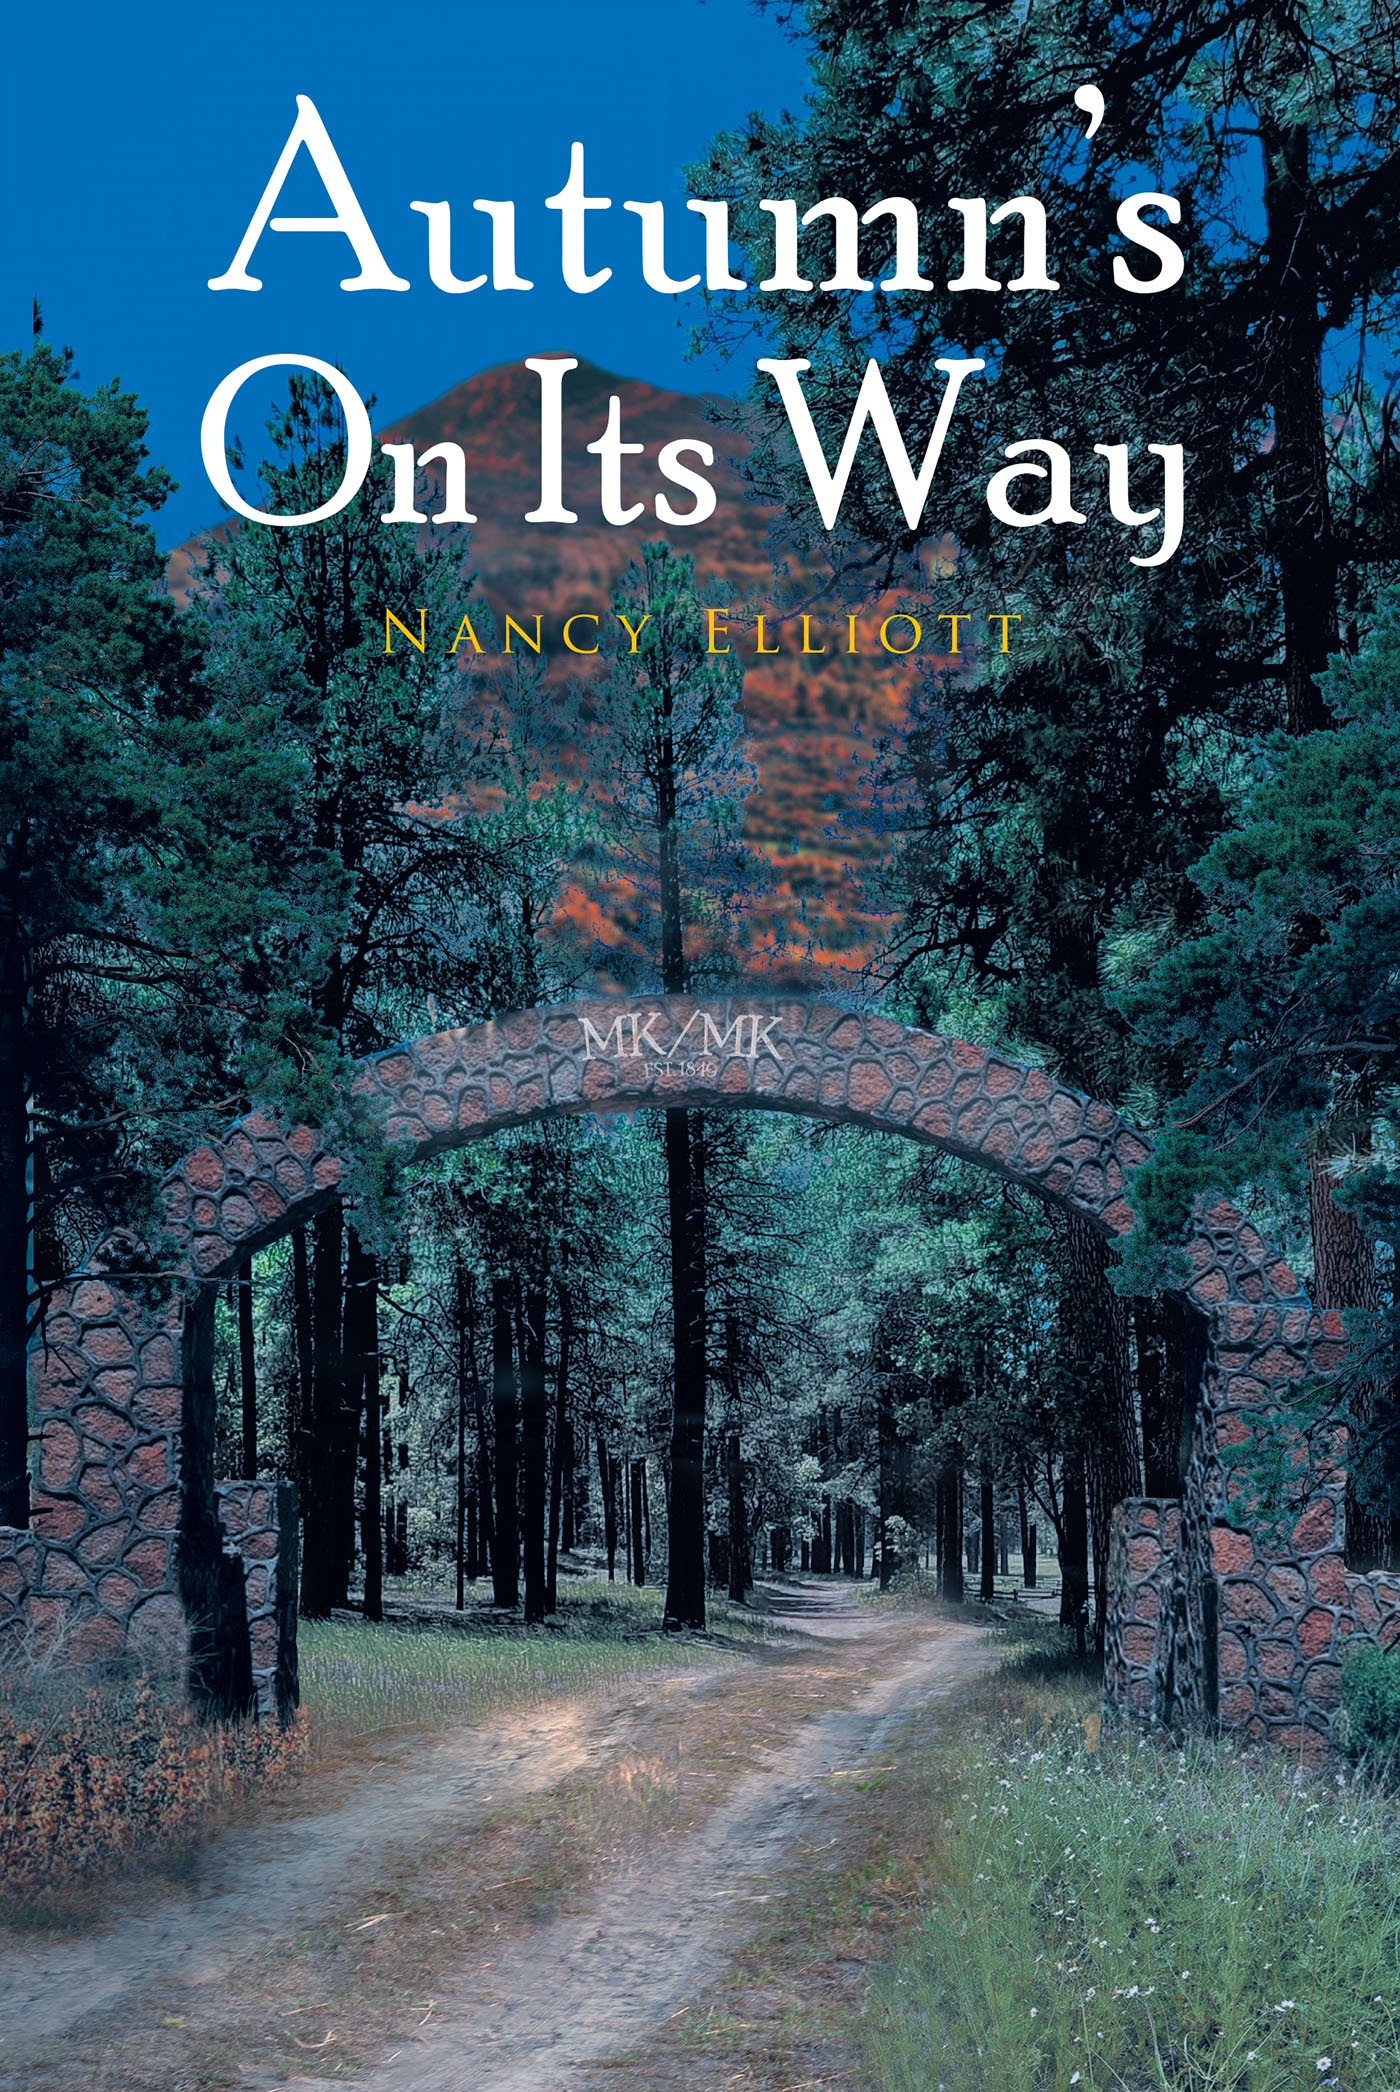 Nancy Elliott’s Debut Novel, "Autumn’s On Its Way," Follows a Widow Who, Inspired by a Kindredship with Her Ranch’s Orchardist, Rediscovers Her Strength and Love for Life